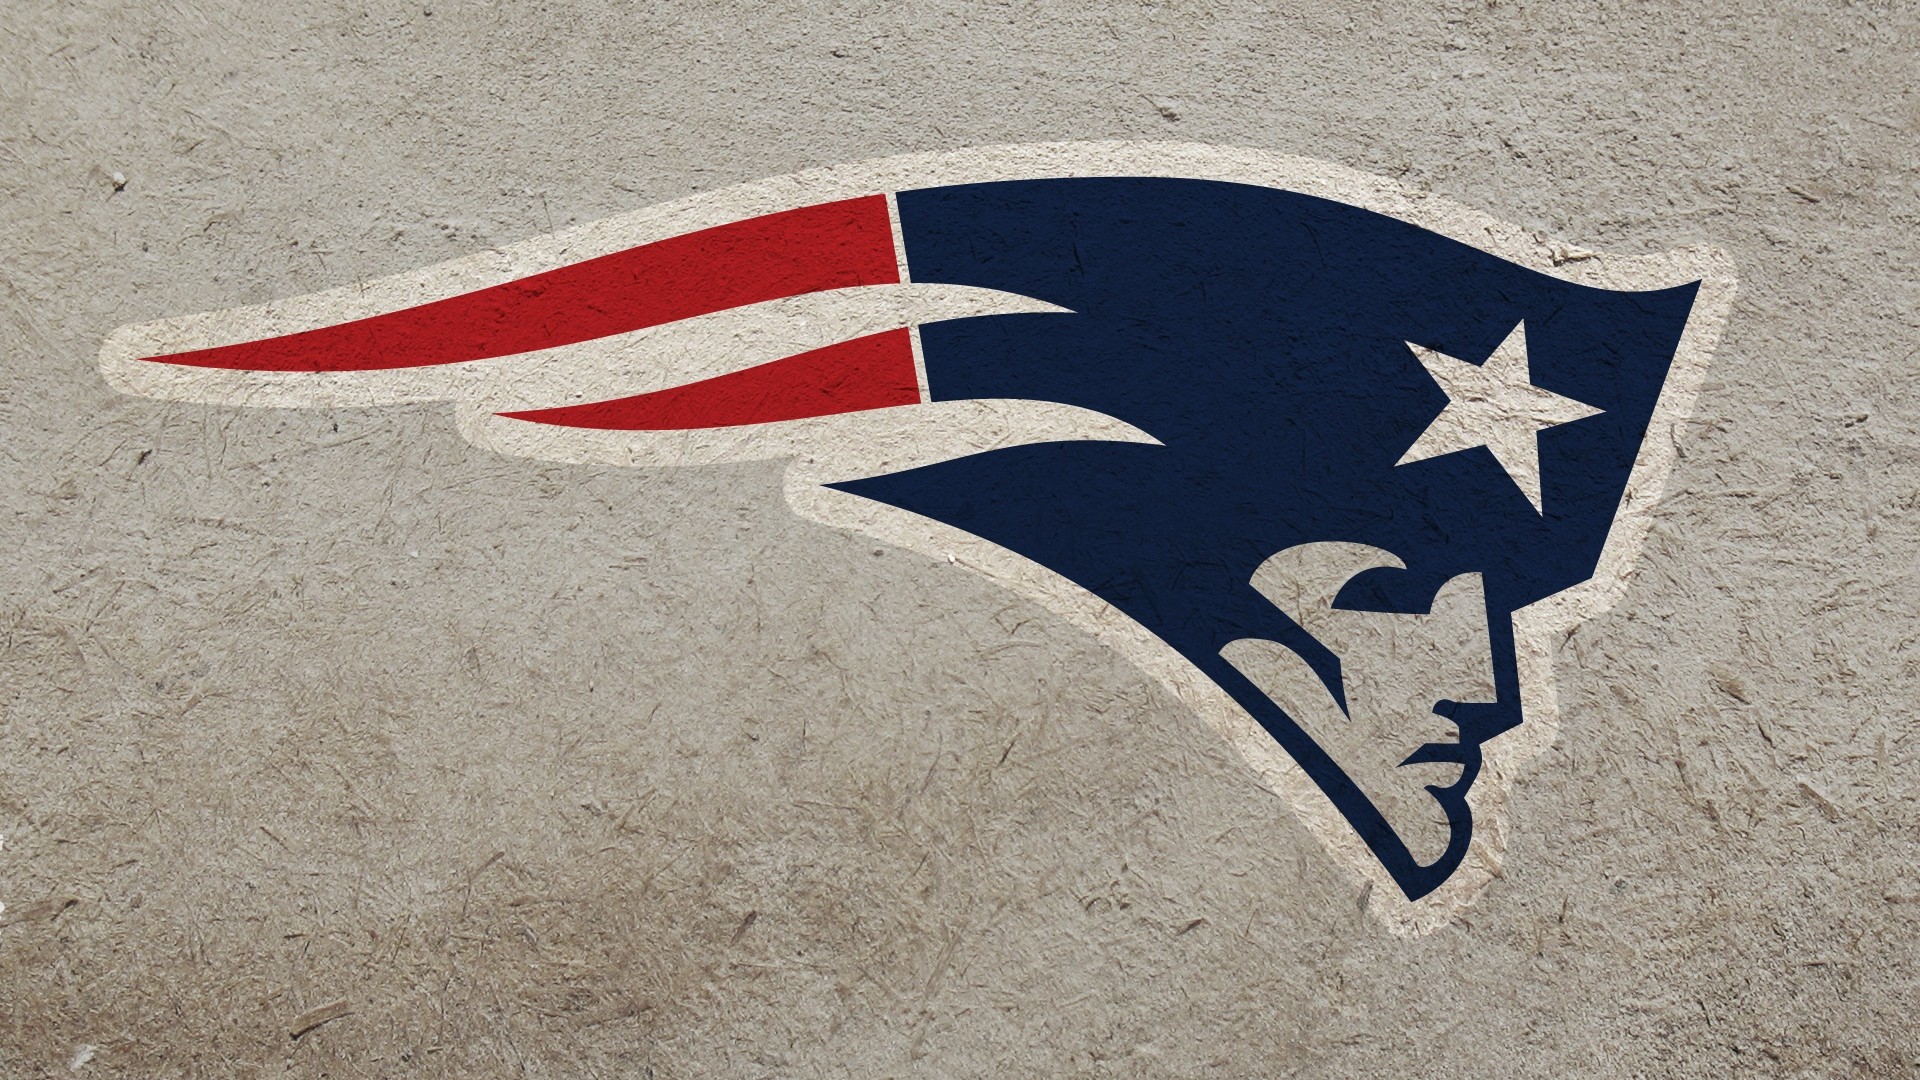 NE Patriots Wallpaper HD With Resolution 1920X1080 pixel. You can make this wallpaper for your Mac or Windows Desktop Background, iPhone, Android or Tablet and another Smartphone device for free